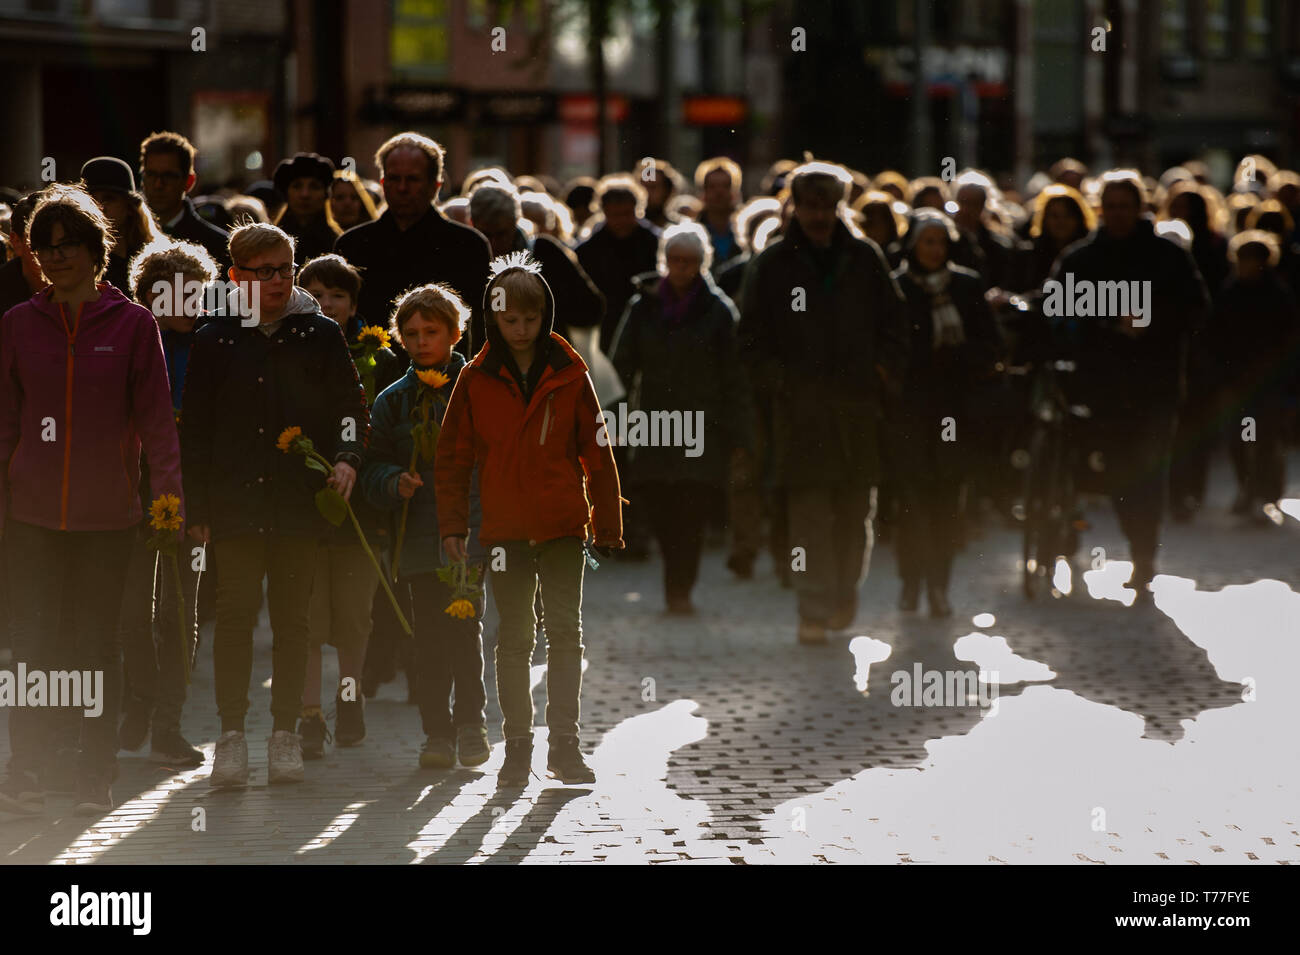 Nijmegen, Netherlands. 04th May, 2019. People with flowers are seen walking in silence to the monument during the event. Remembrance day celebrations of the victims of WWII in Nijmegen was held with several ceremonies, including: unveiling a plaque with an honorary list of the fallen soldiers of WWII on Plein 1944 square, After that, the commemorations took place at the 'Kitty de Wijze', Then from St. Stephen's Church a silent procession on the streets of 'Keizer Traianusplein', where two monuments of the victims of WWII stand. Credit: SOPA Images Limited/Alamy Live News Stock Photo